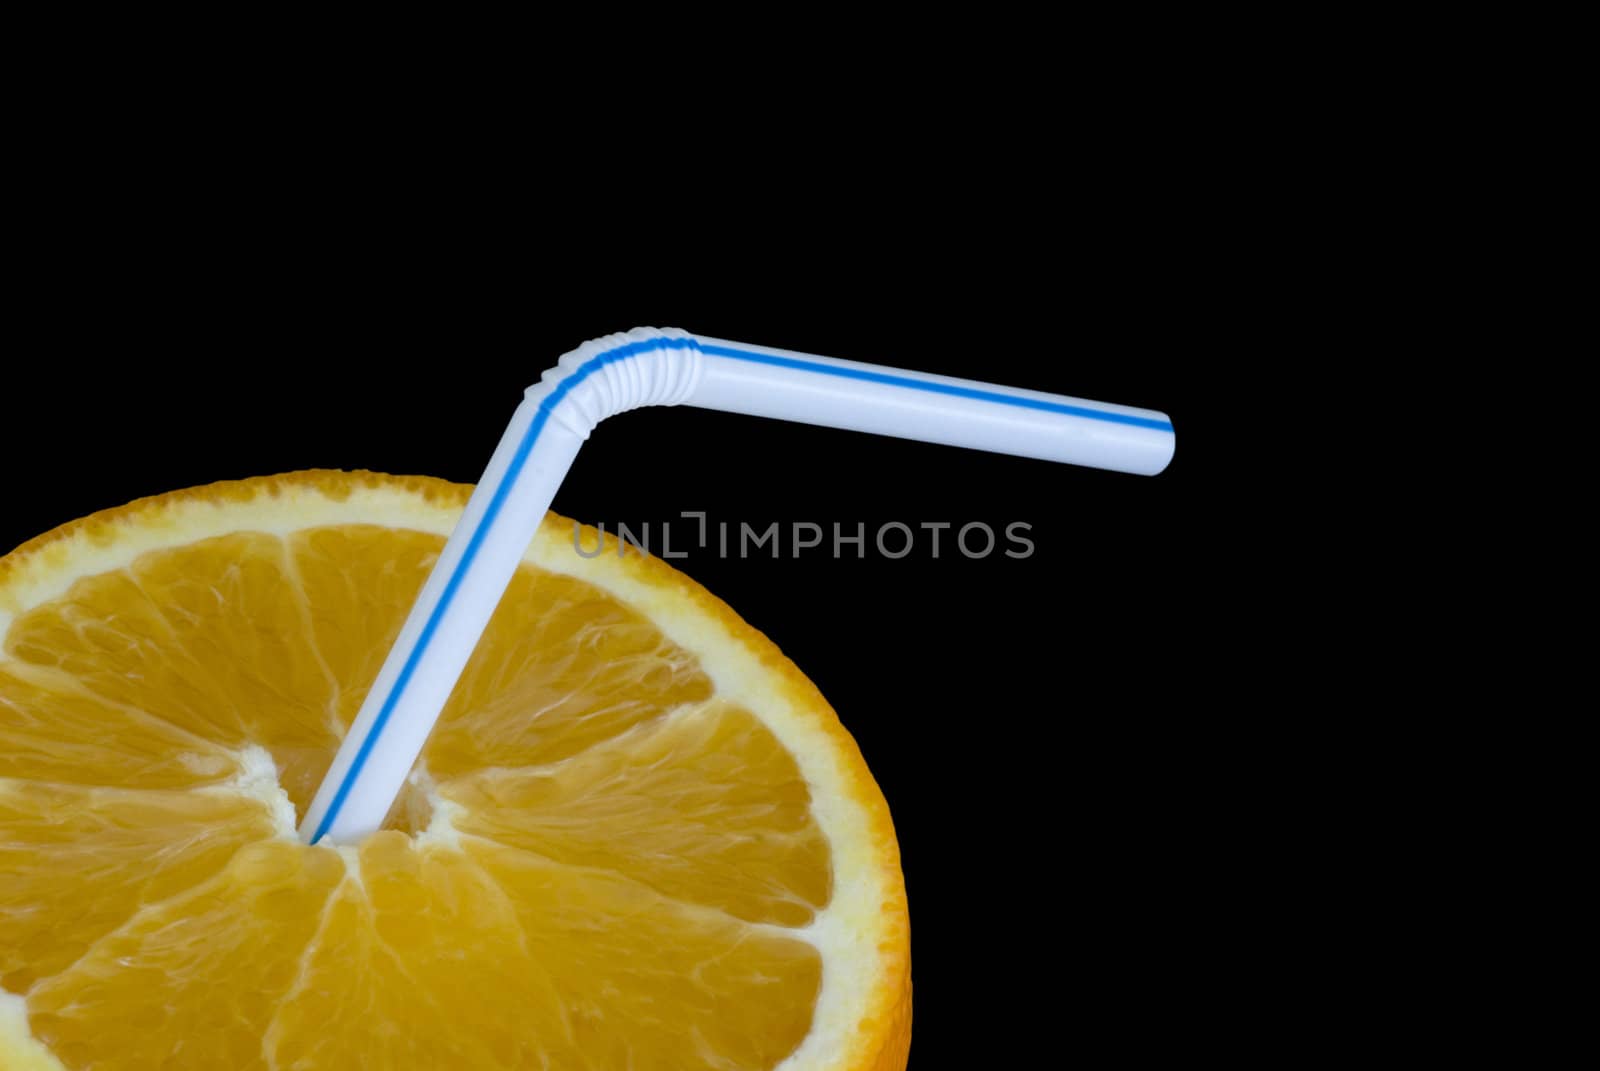 a ripe orange and a drinking straw